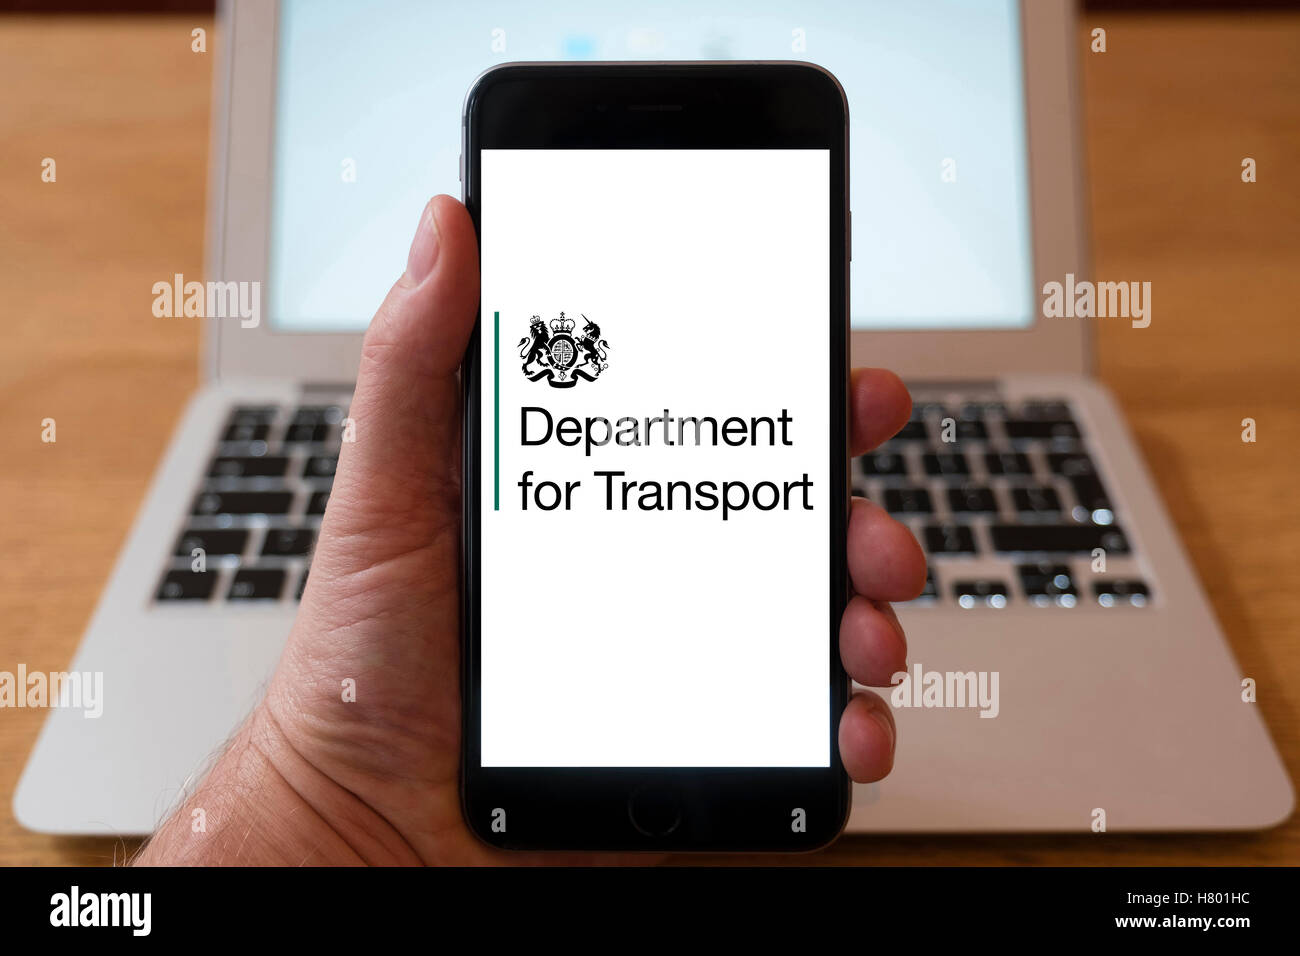 Using iPhone smartphone to display logo of UK Department of Transport Stock Photo